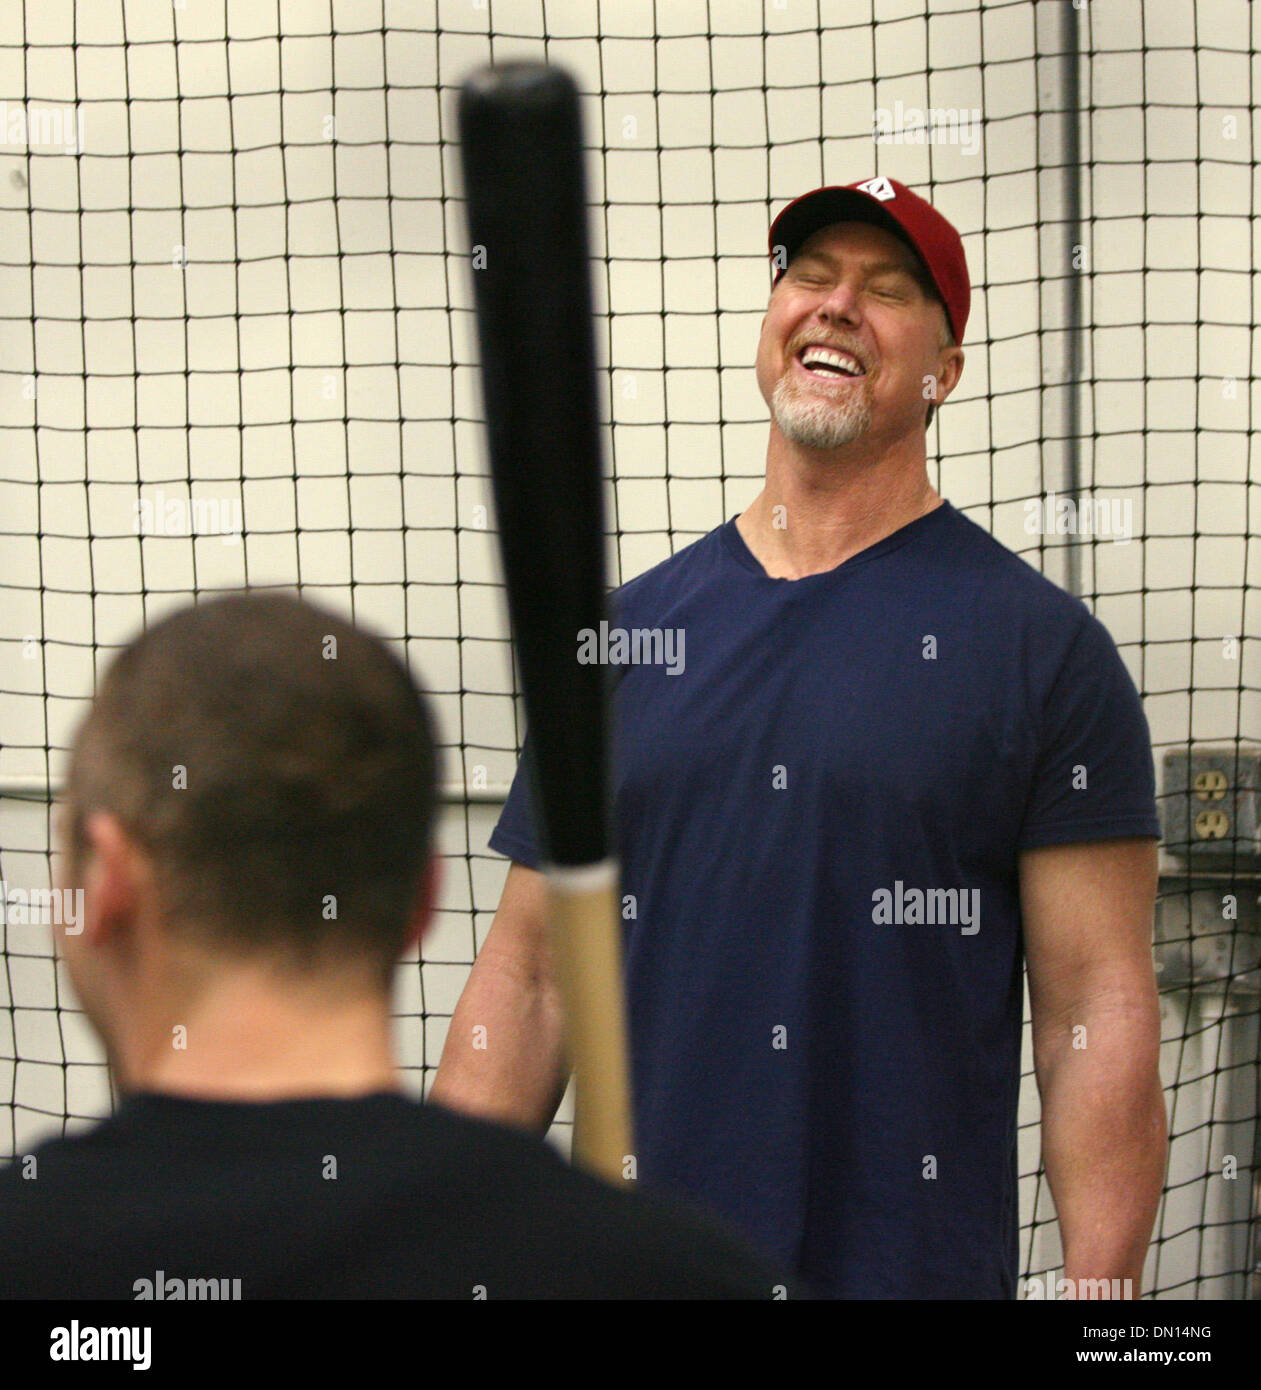 Jan 13, 2010 - Huntington Beach, California, USA - Cardinals hitting instructor MARK MCGWIRE laughs as he works with infielder BRENDAN RYAN during a training session at a local baseball practice facility in Huntington Beach, Calif. The session with the Cardinals infielders was the first McGwire had had since his announcement Monday that he used performance enhancing drugs during hi Stock Photo